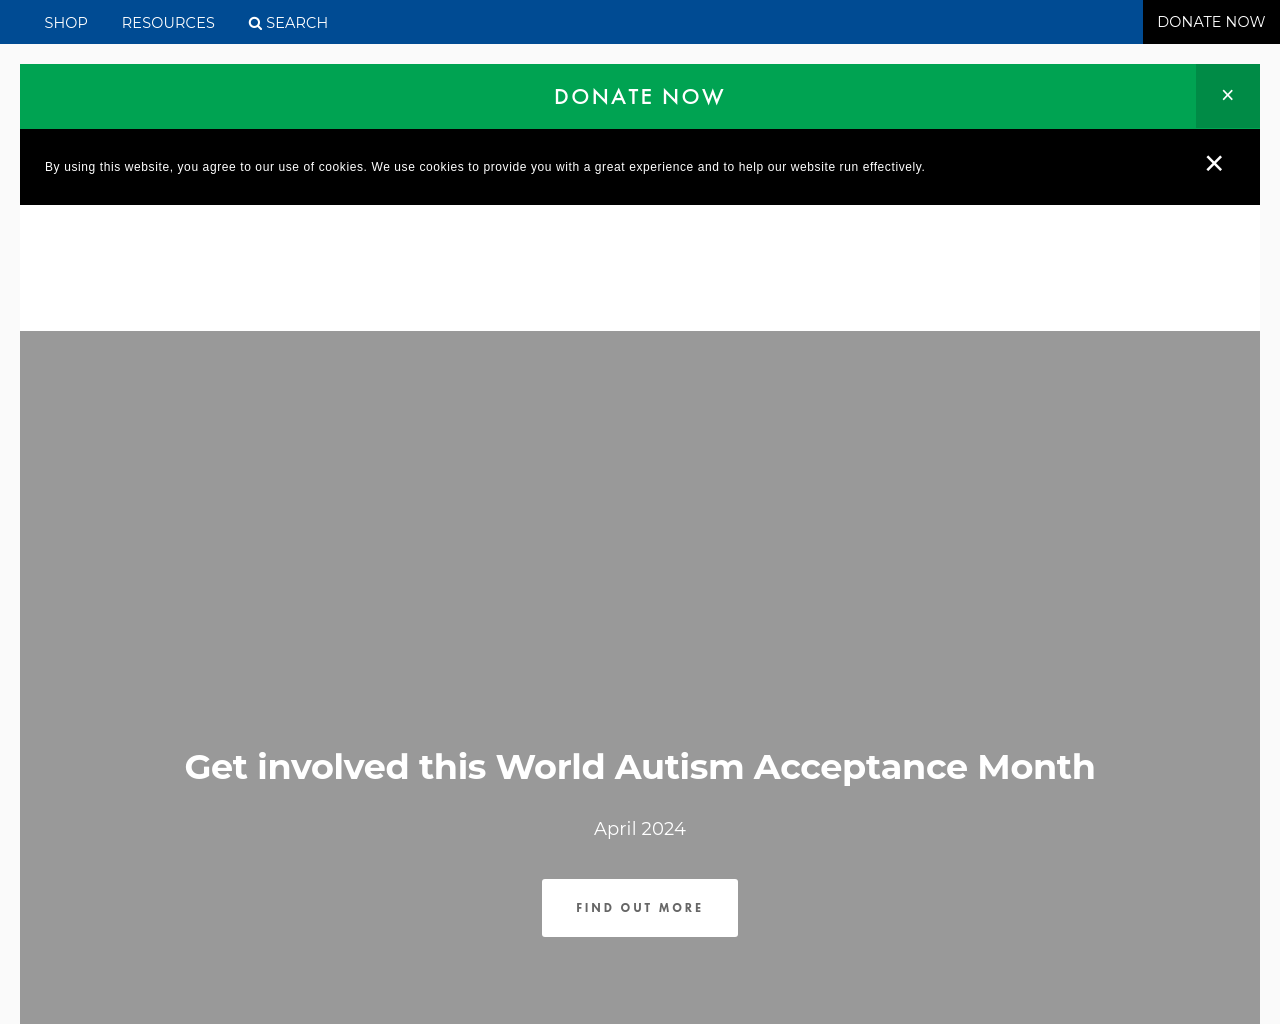 Autism help and support website